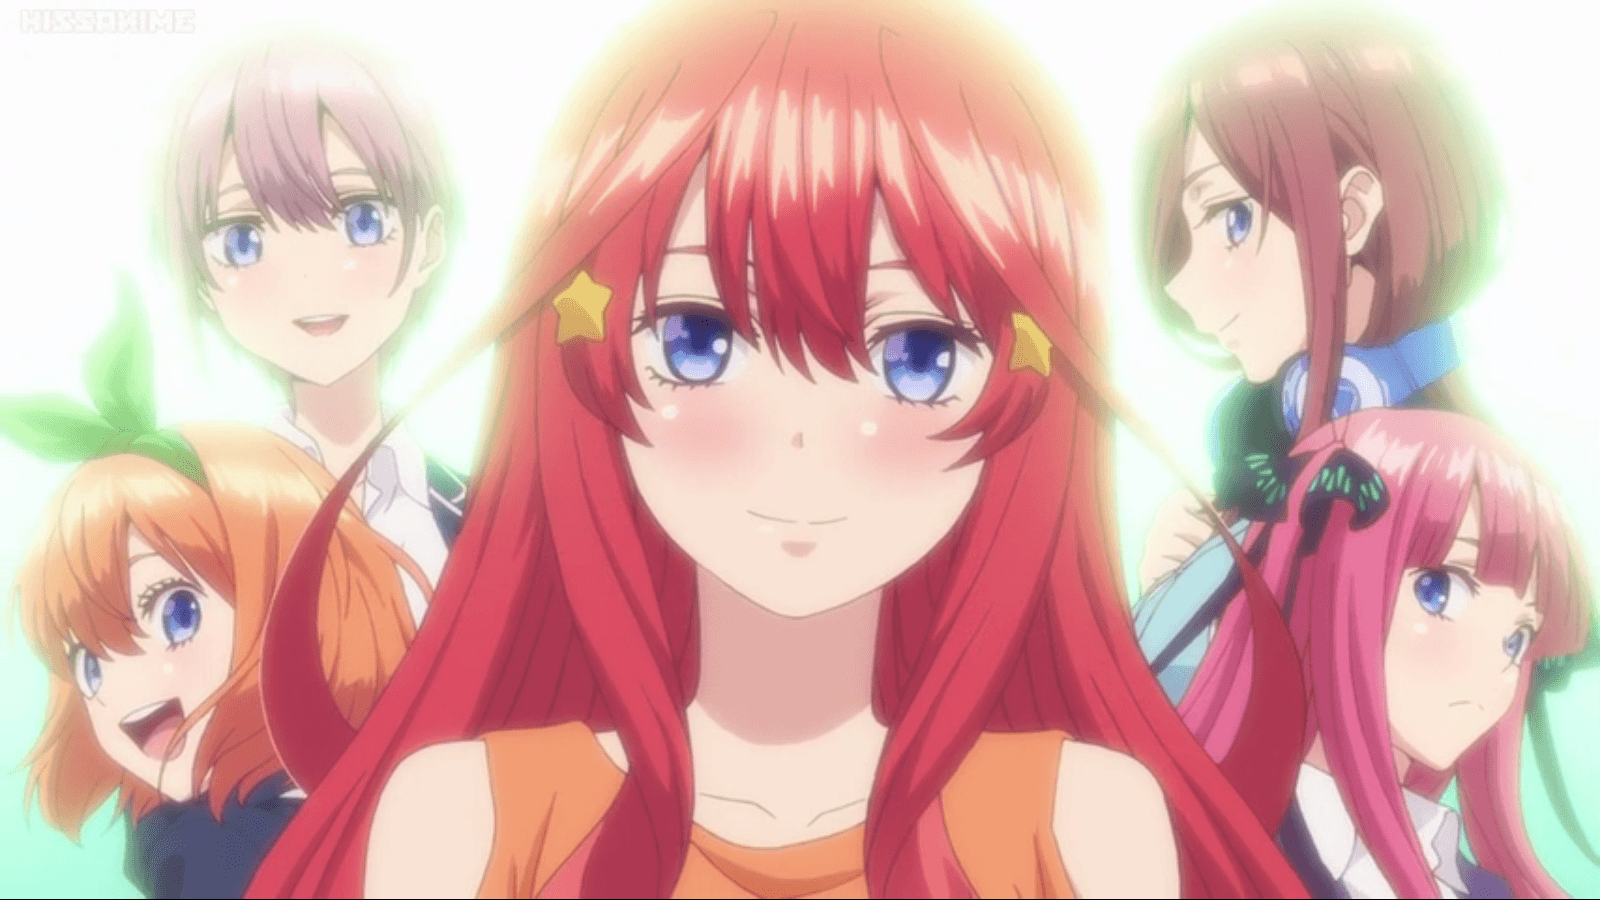 The Quintessential Quintuplets. Gotoubun no hanayome in 2019